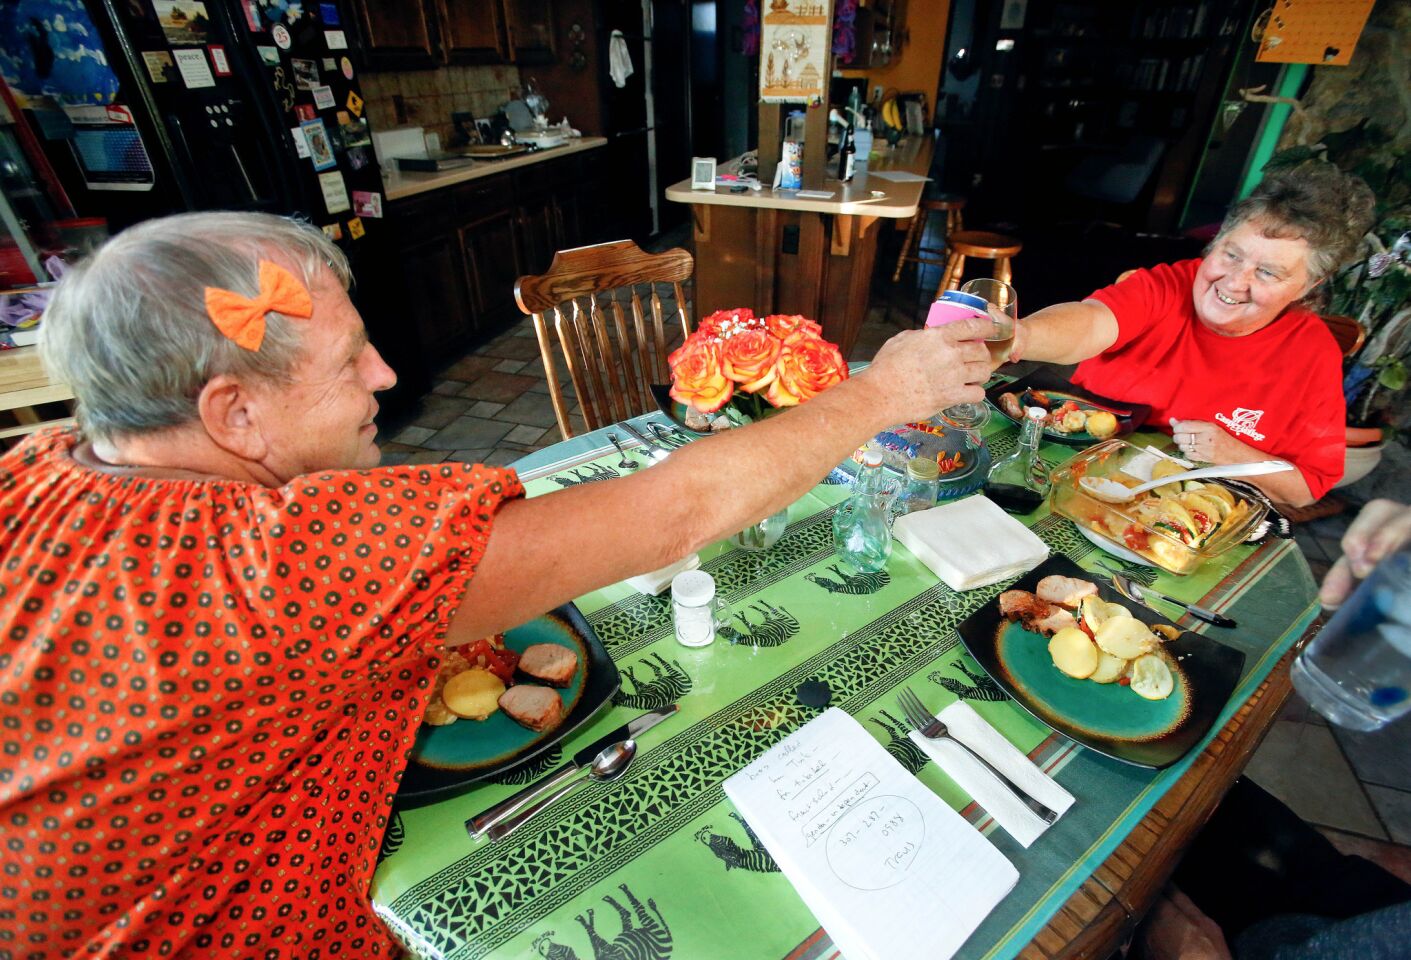 Sissy and Vickie Goodwin click glasses before dinner at home. He credits her with helping him learn to accept himself.